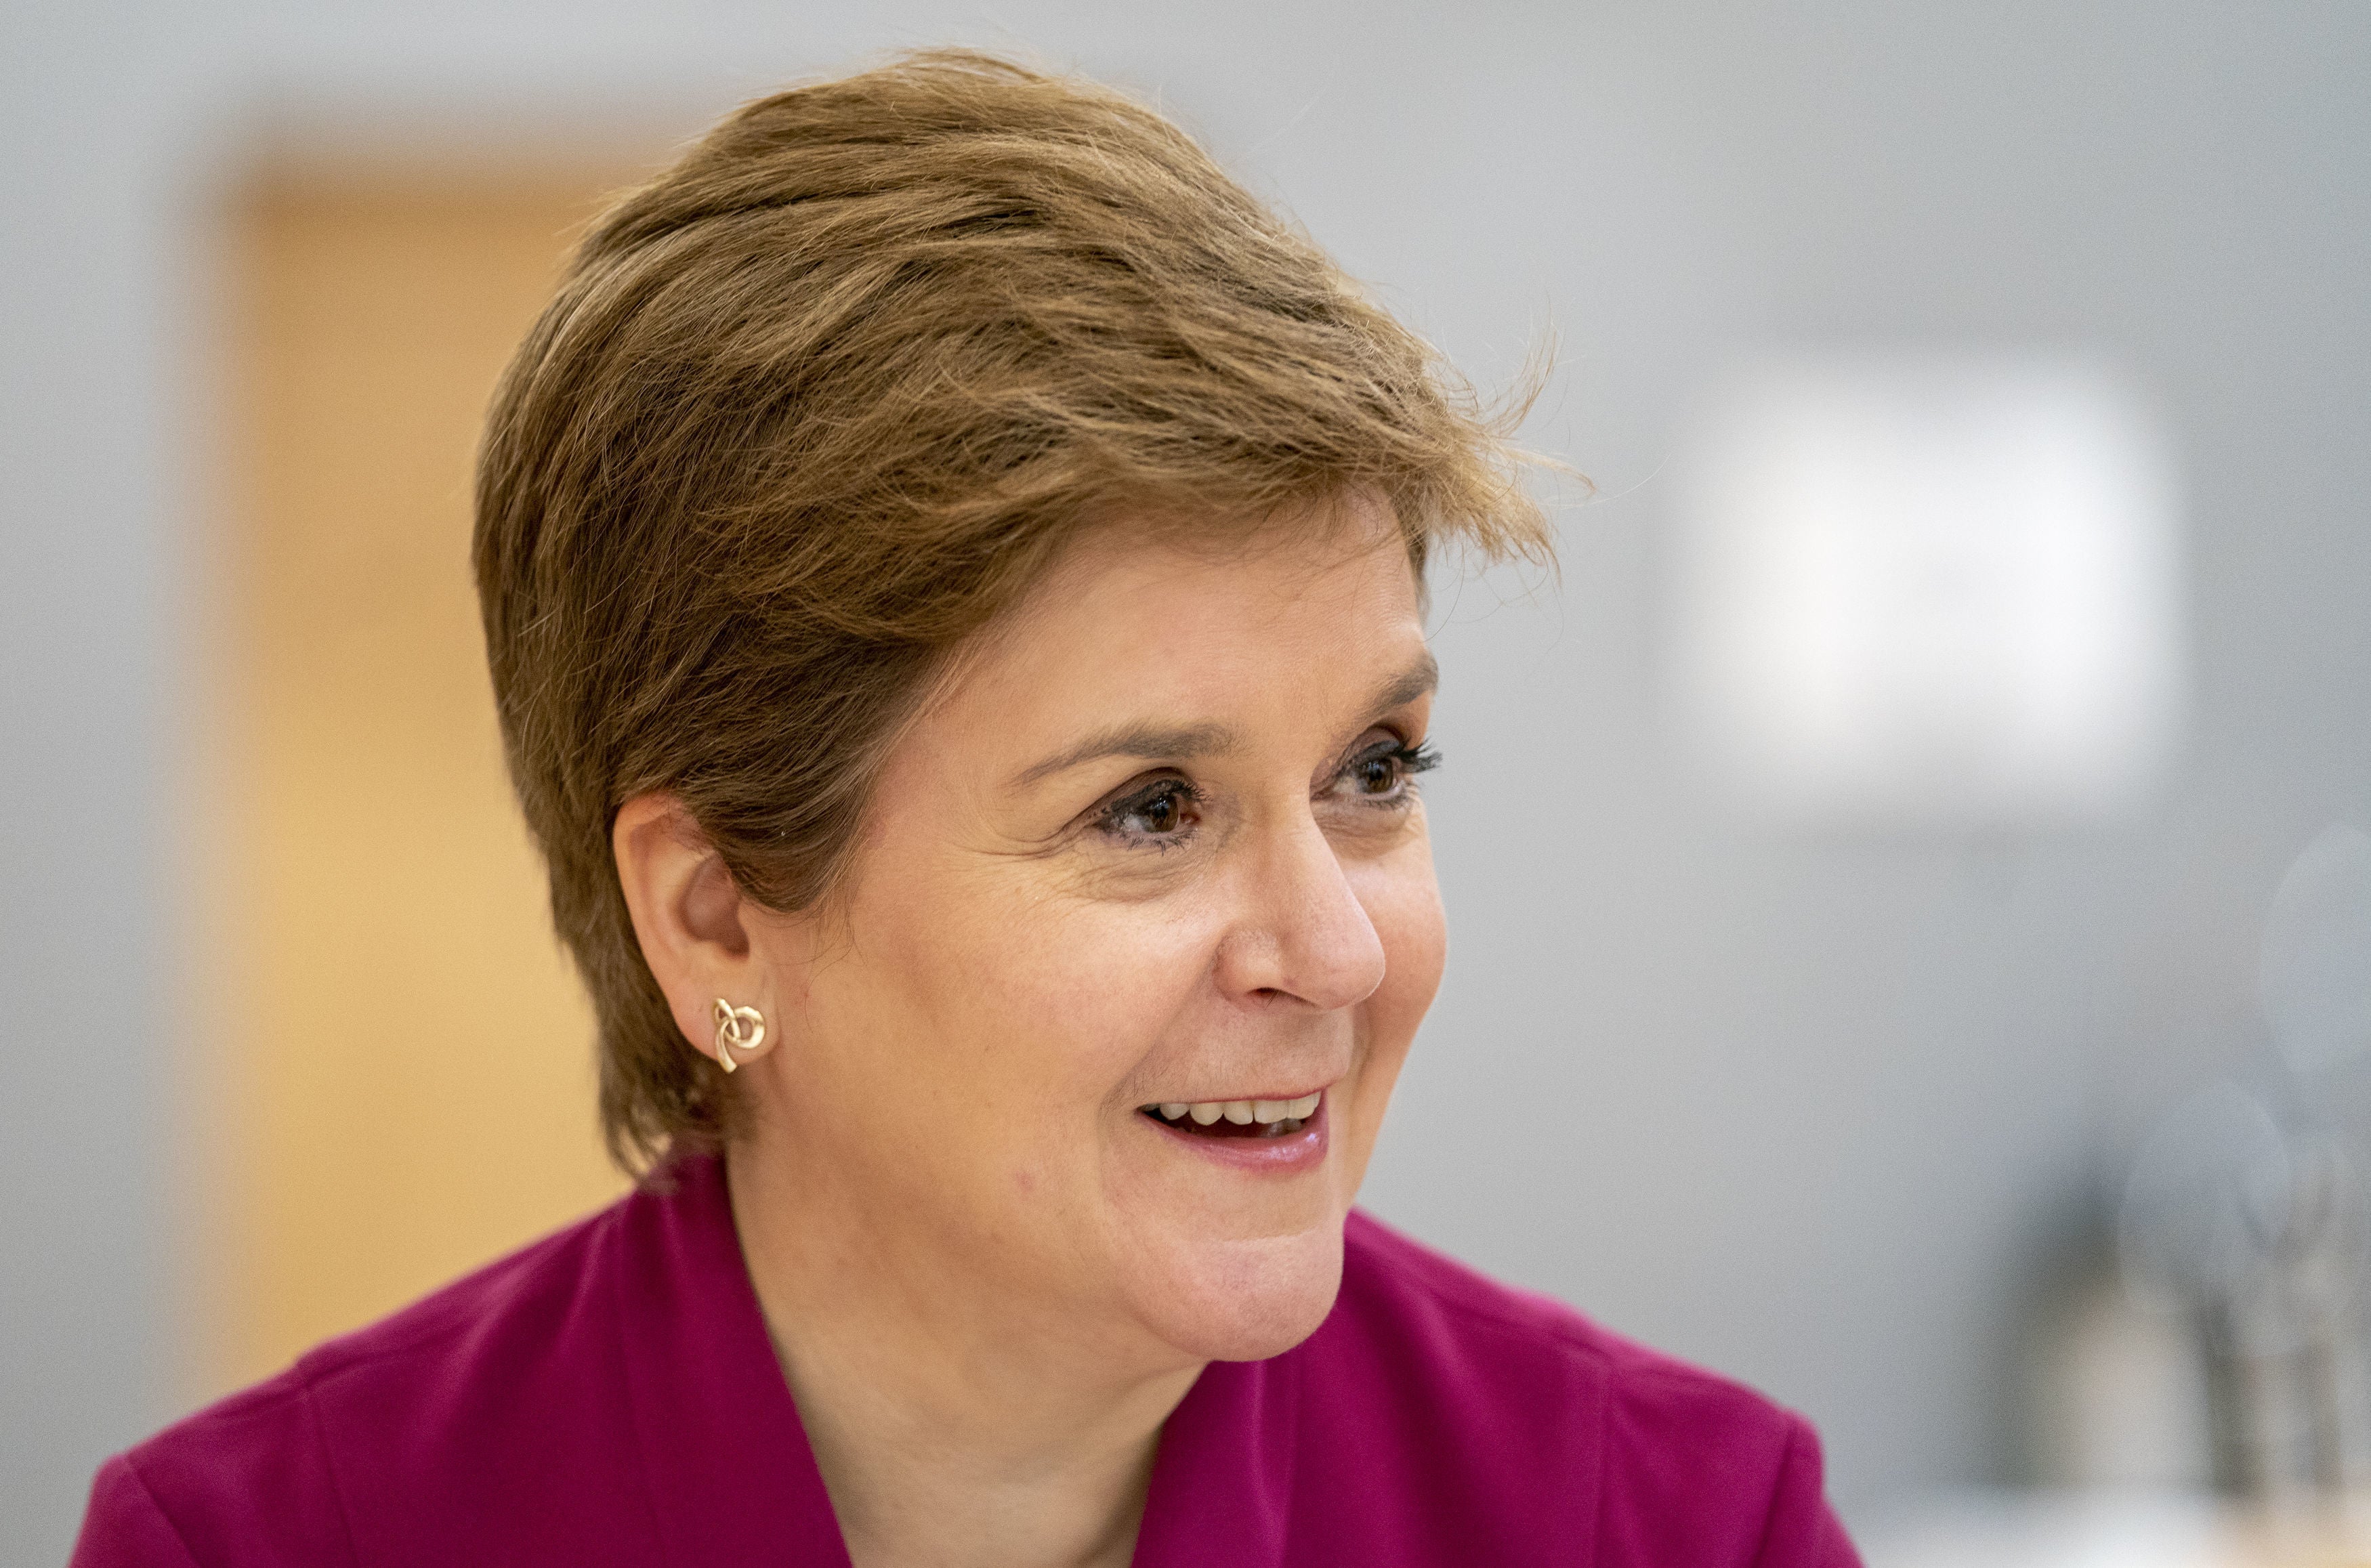 Nicola Sturgeon has already said she hopes to ‘catch a word’ with the young campaigner. (Jane Barlow/PA)